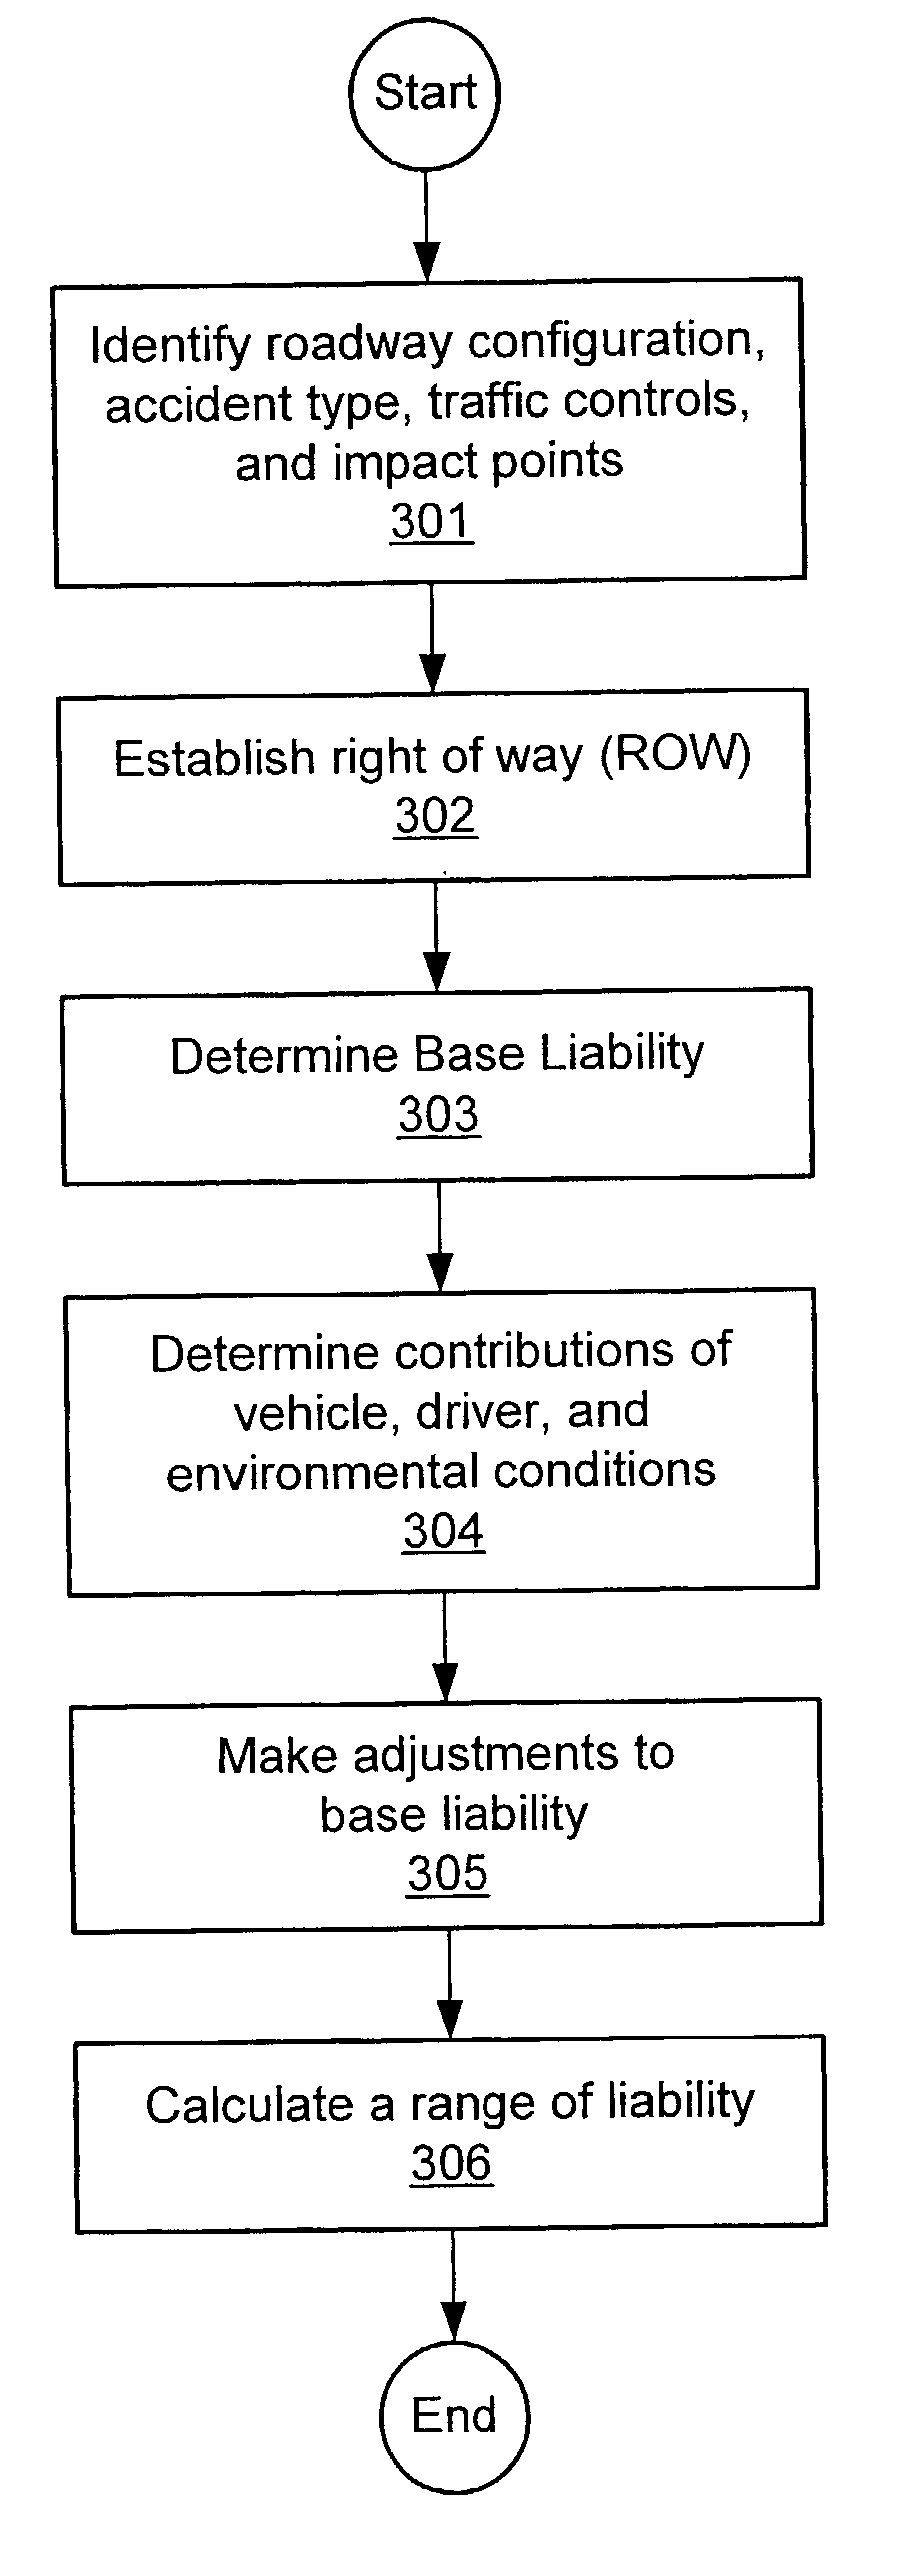 Computerized method and system for estimating an effect on liability based on the stopping distance of vehicles